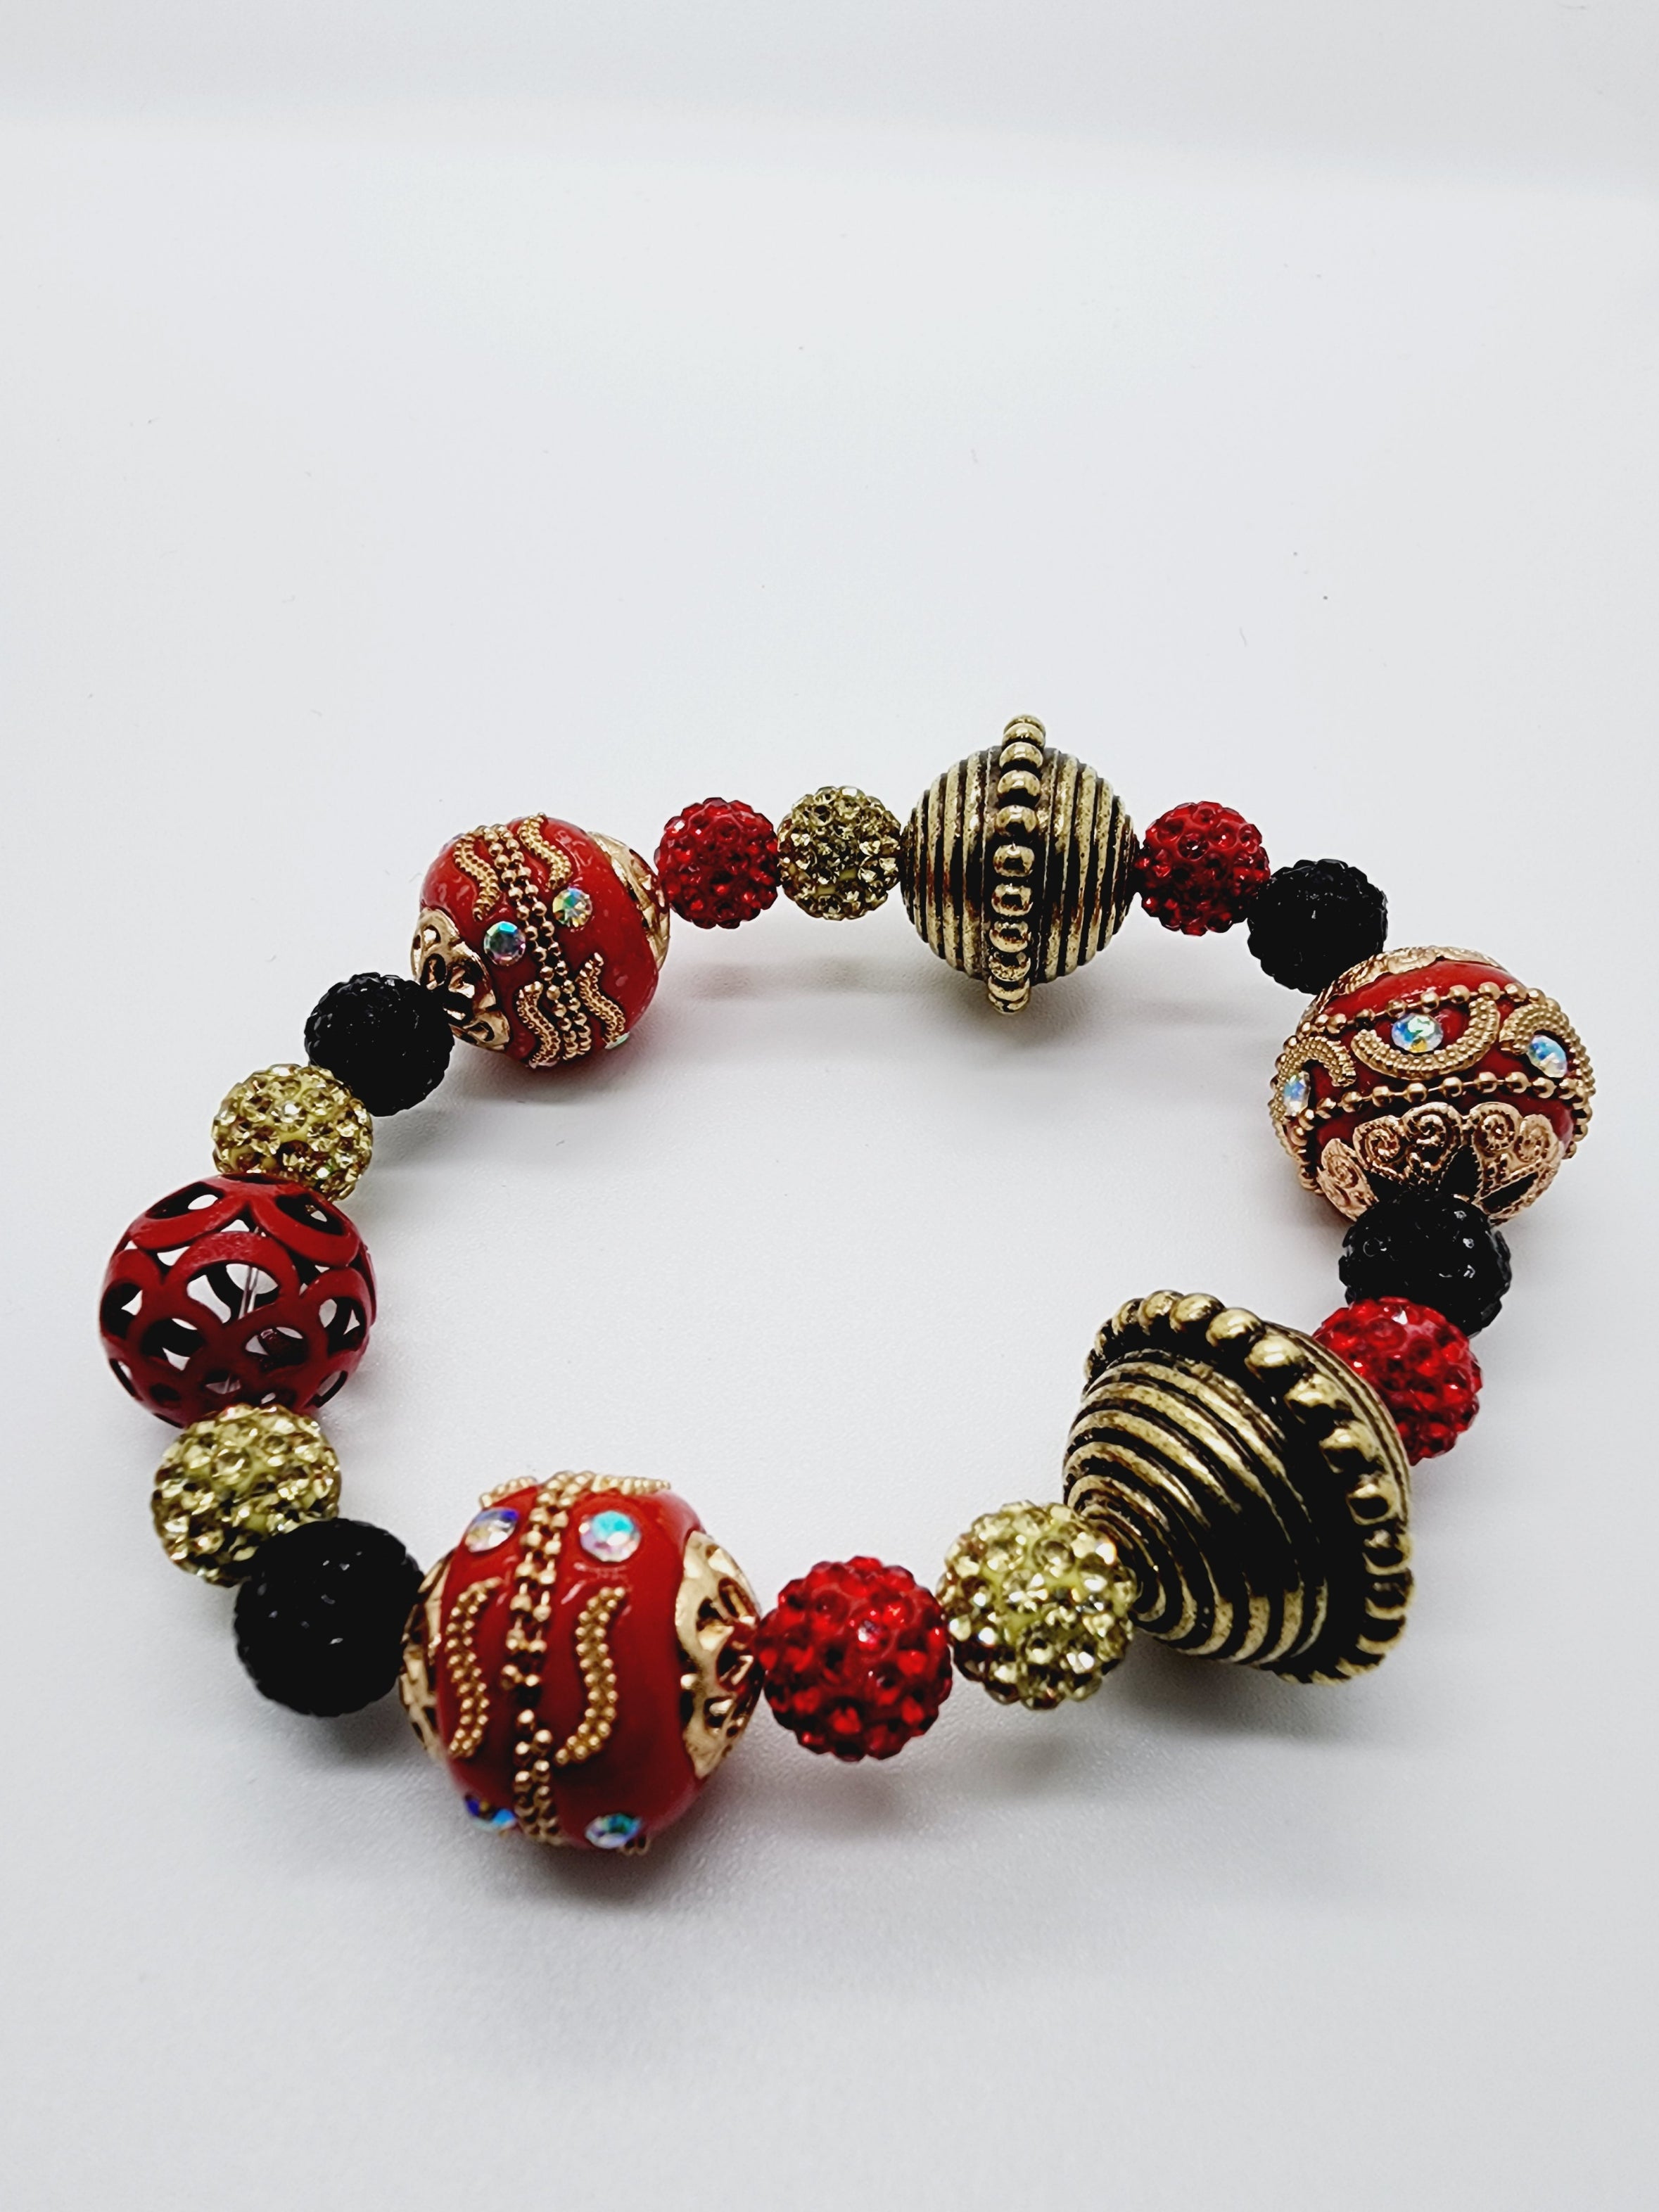 Length: 7.75 inches | Weight: 3.2 ounces  Distinctly You! This bracelet set is handmade using red, black, and gold ornate bead mix, and bracelet uses 8mm latex free clear stretch cord. 